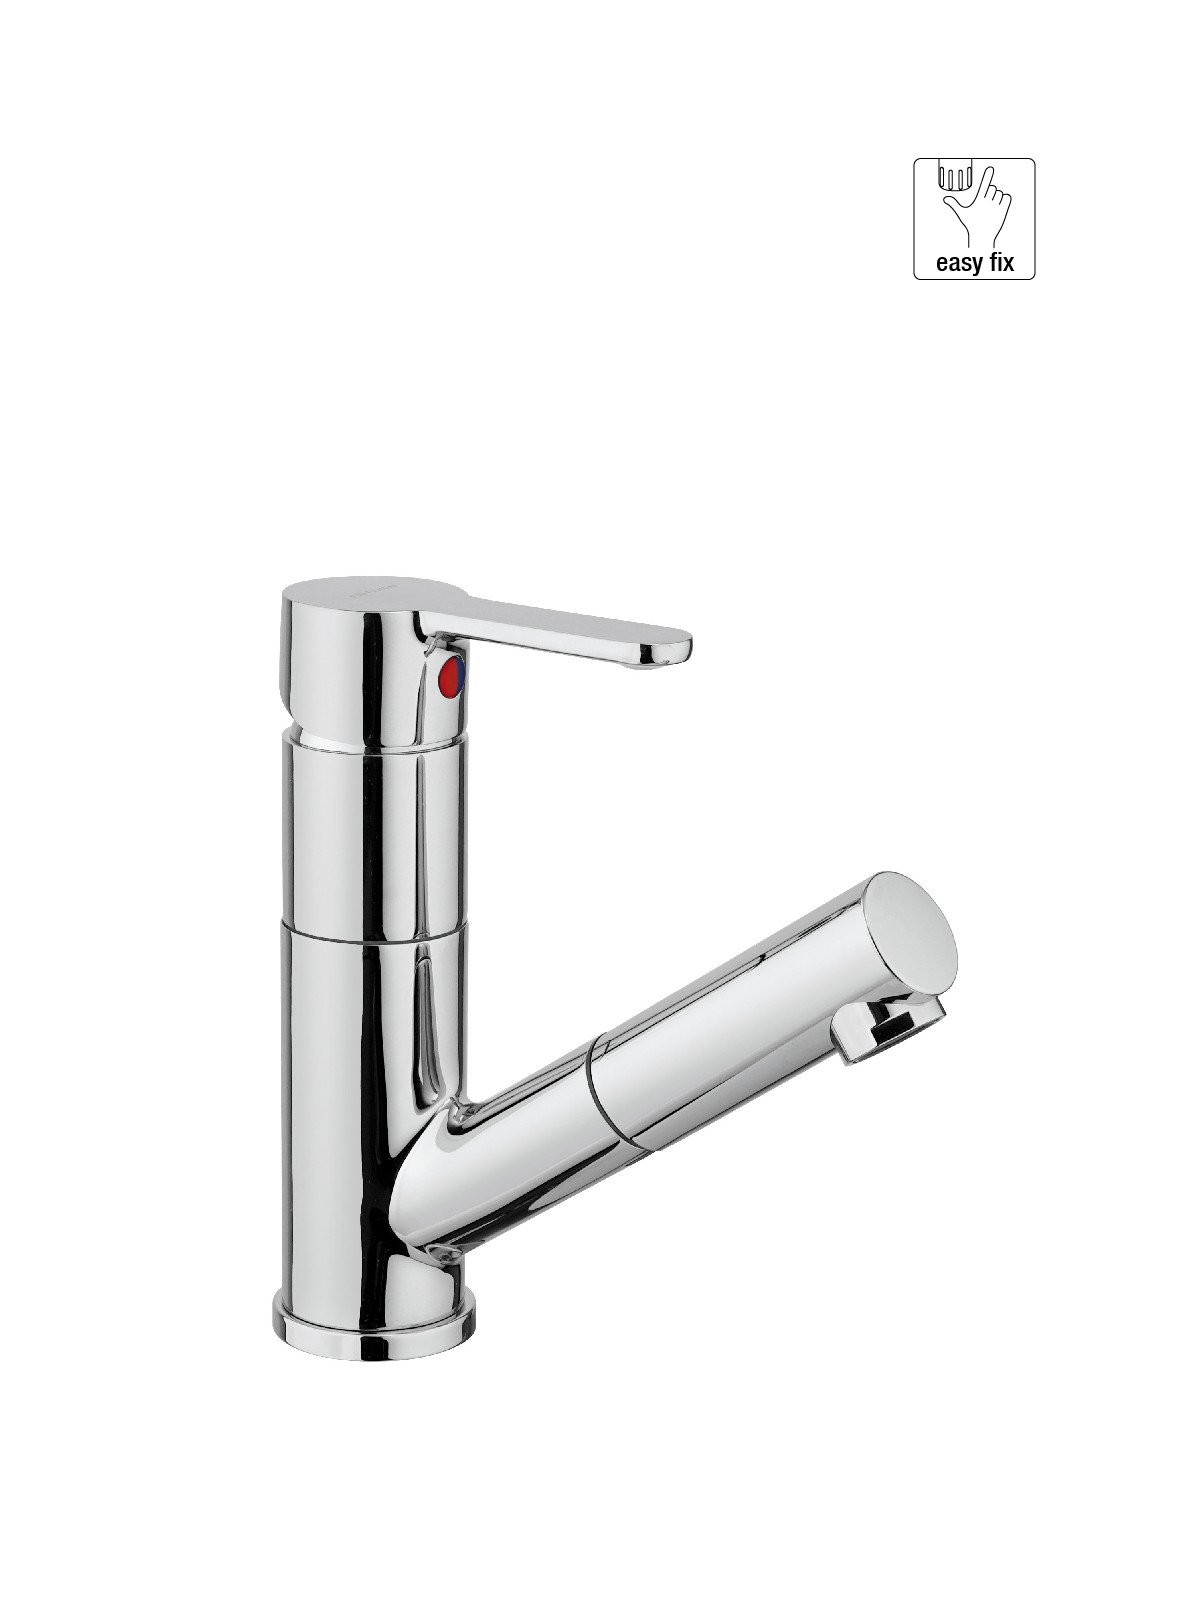 Single-lever washbasin mixer with pull-out shower